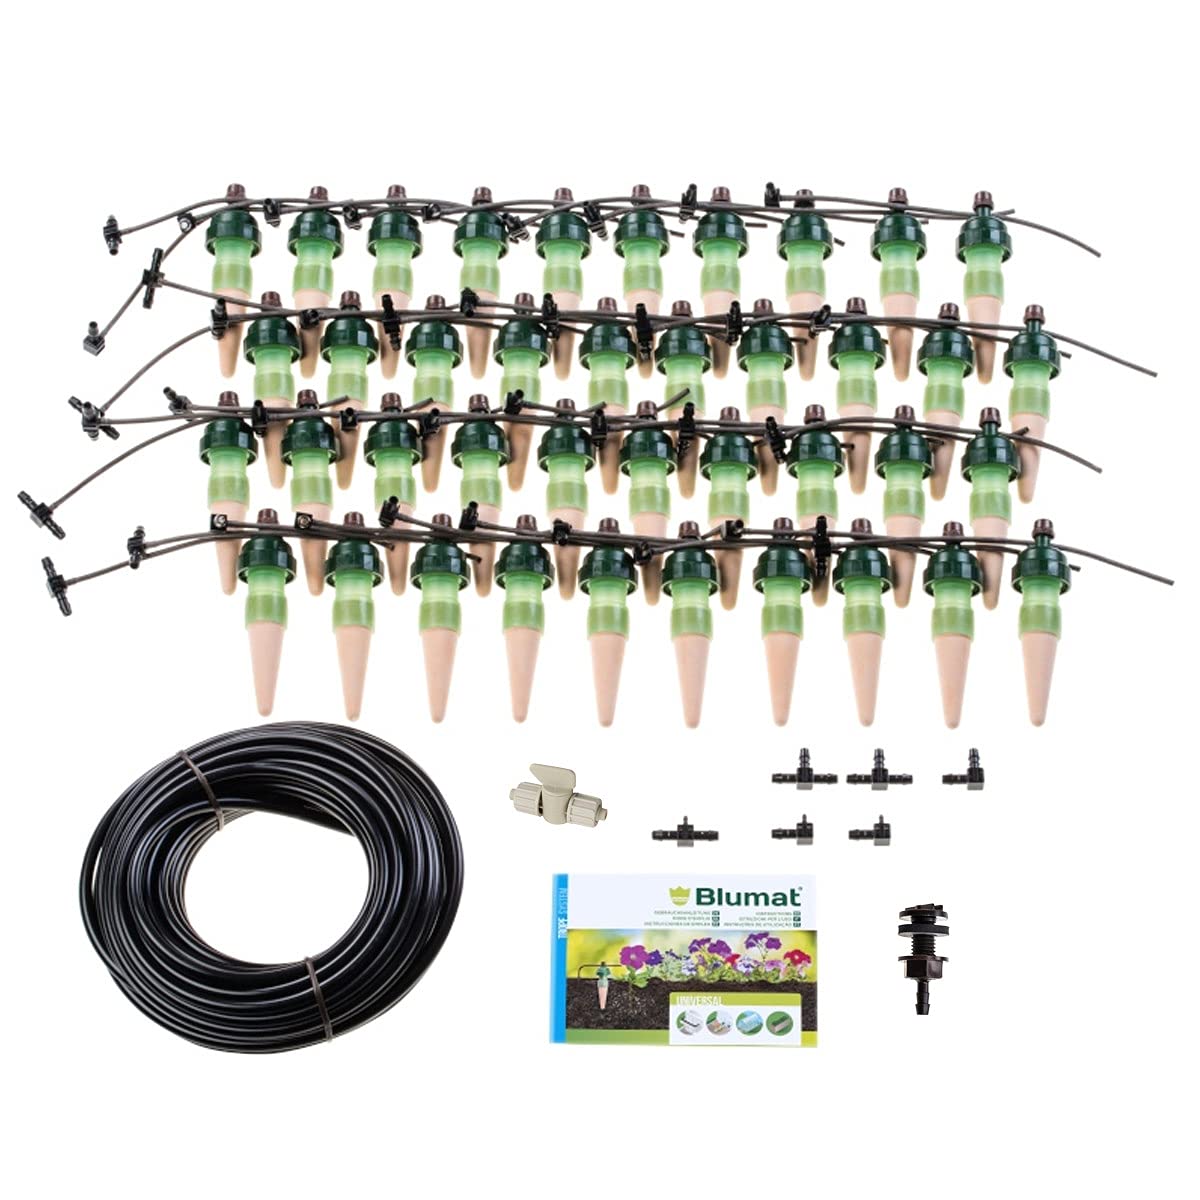 Blumat Watering Systems Automatic Irrigation for Up to 40 Plants| Drip Irrigation Kit | No Electricity, No Batteries Required | Garden, Patio, Hanging Baskets, Raised Bed, Greenhouse